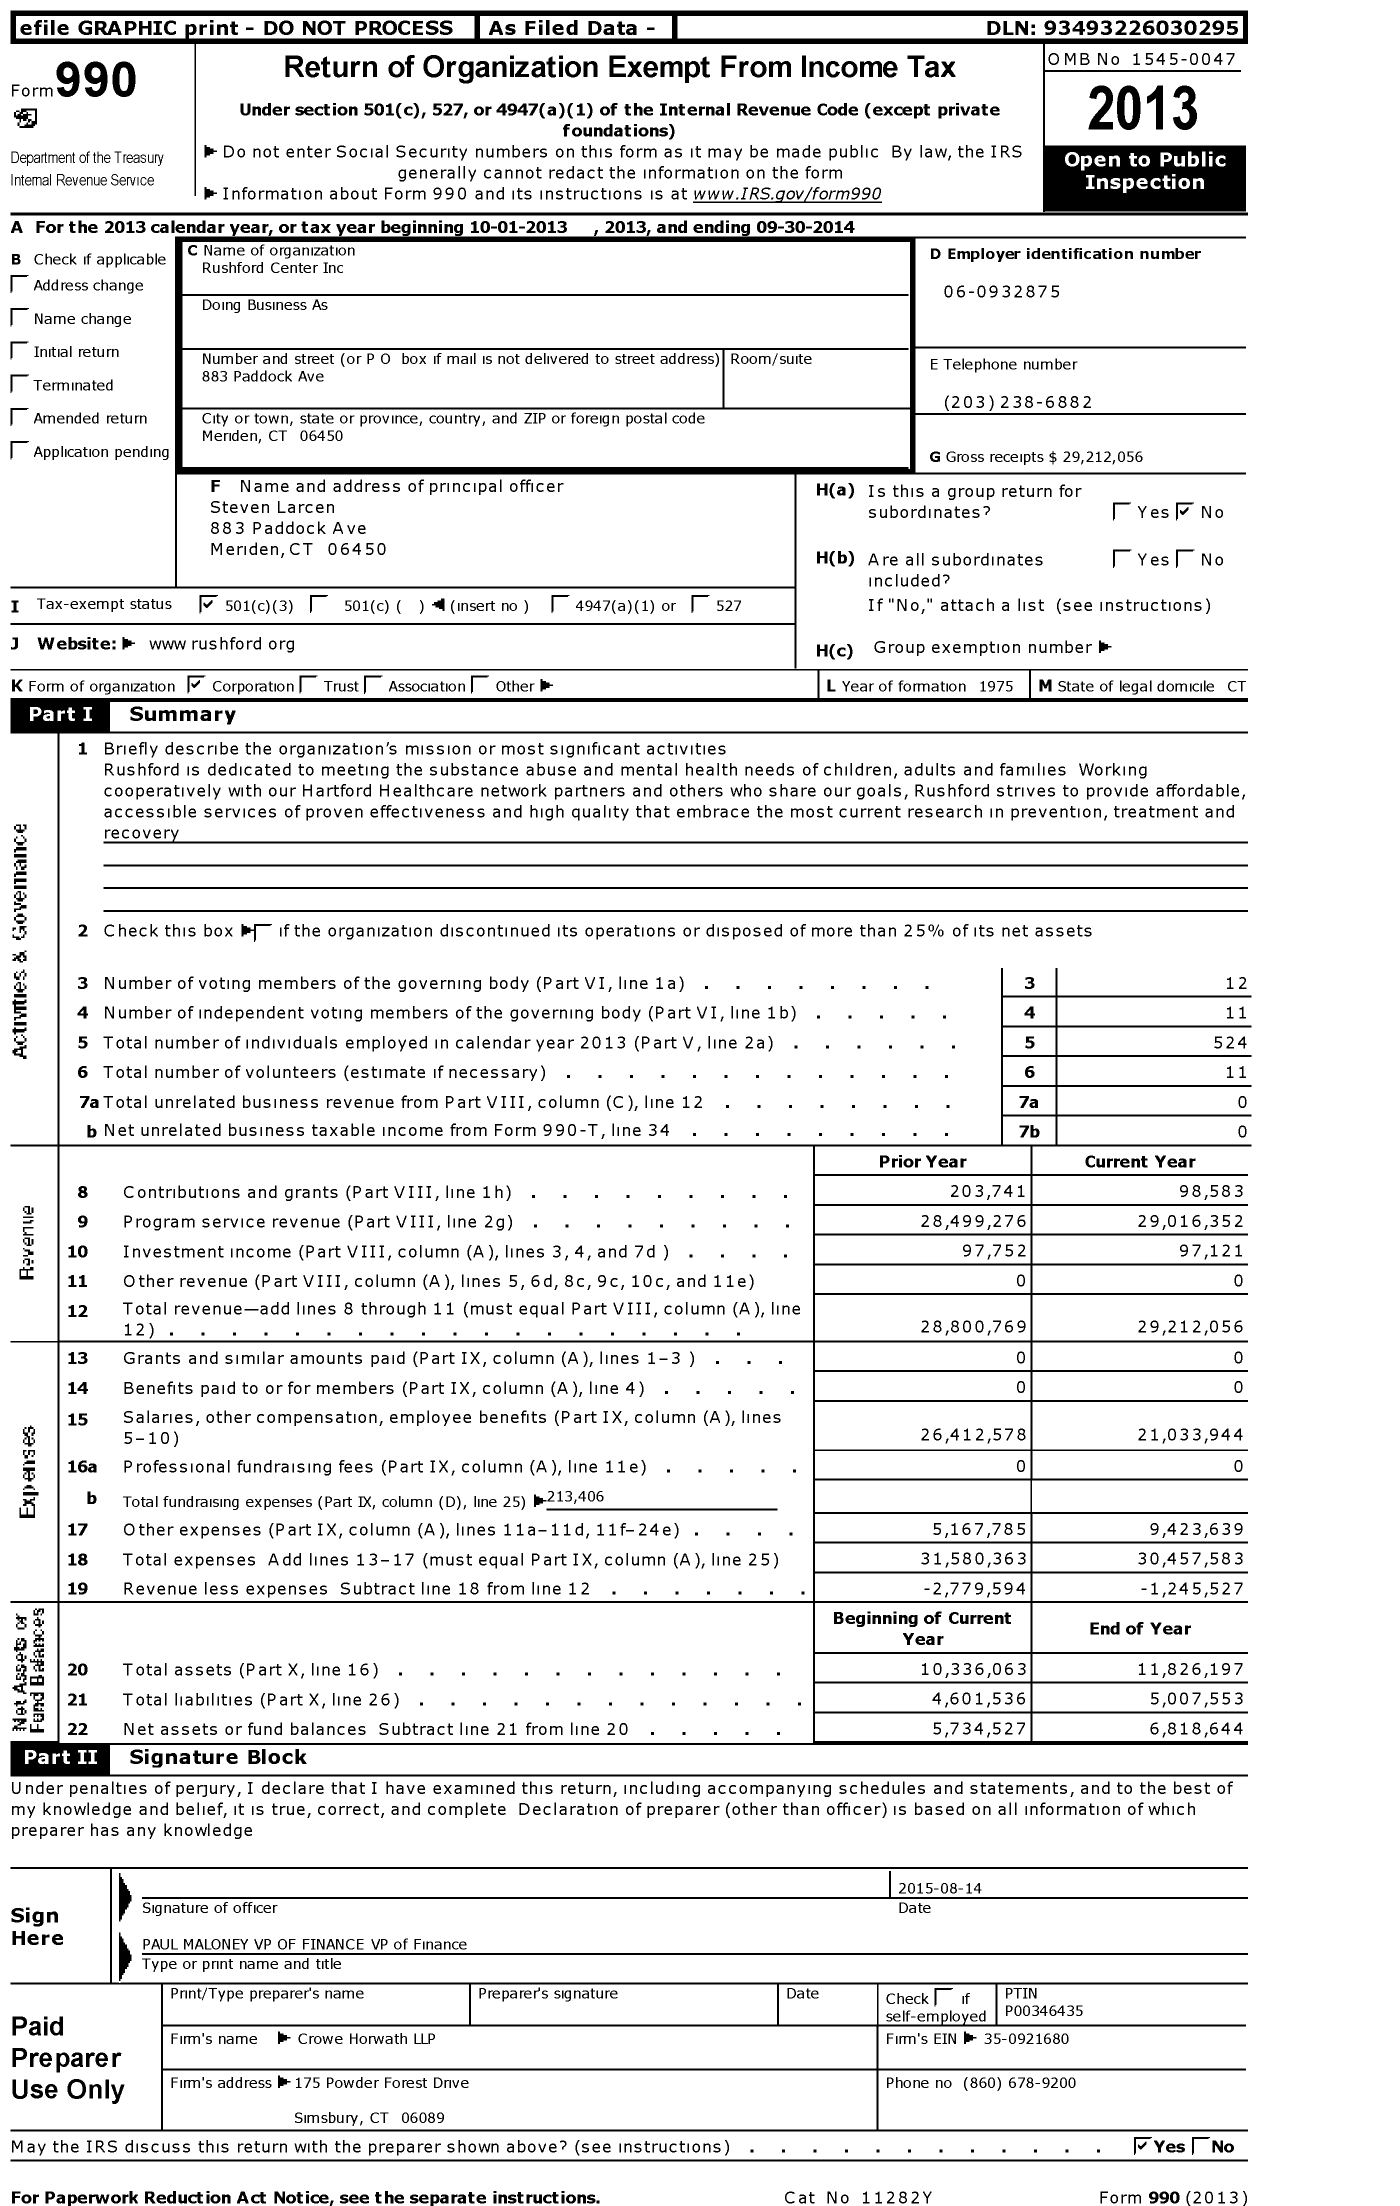 Image of first page of 2013 Form 990 for Rushford Center